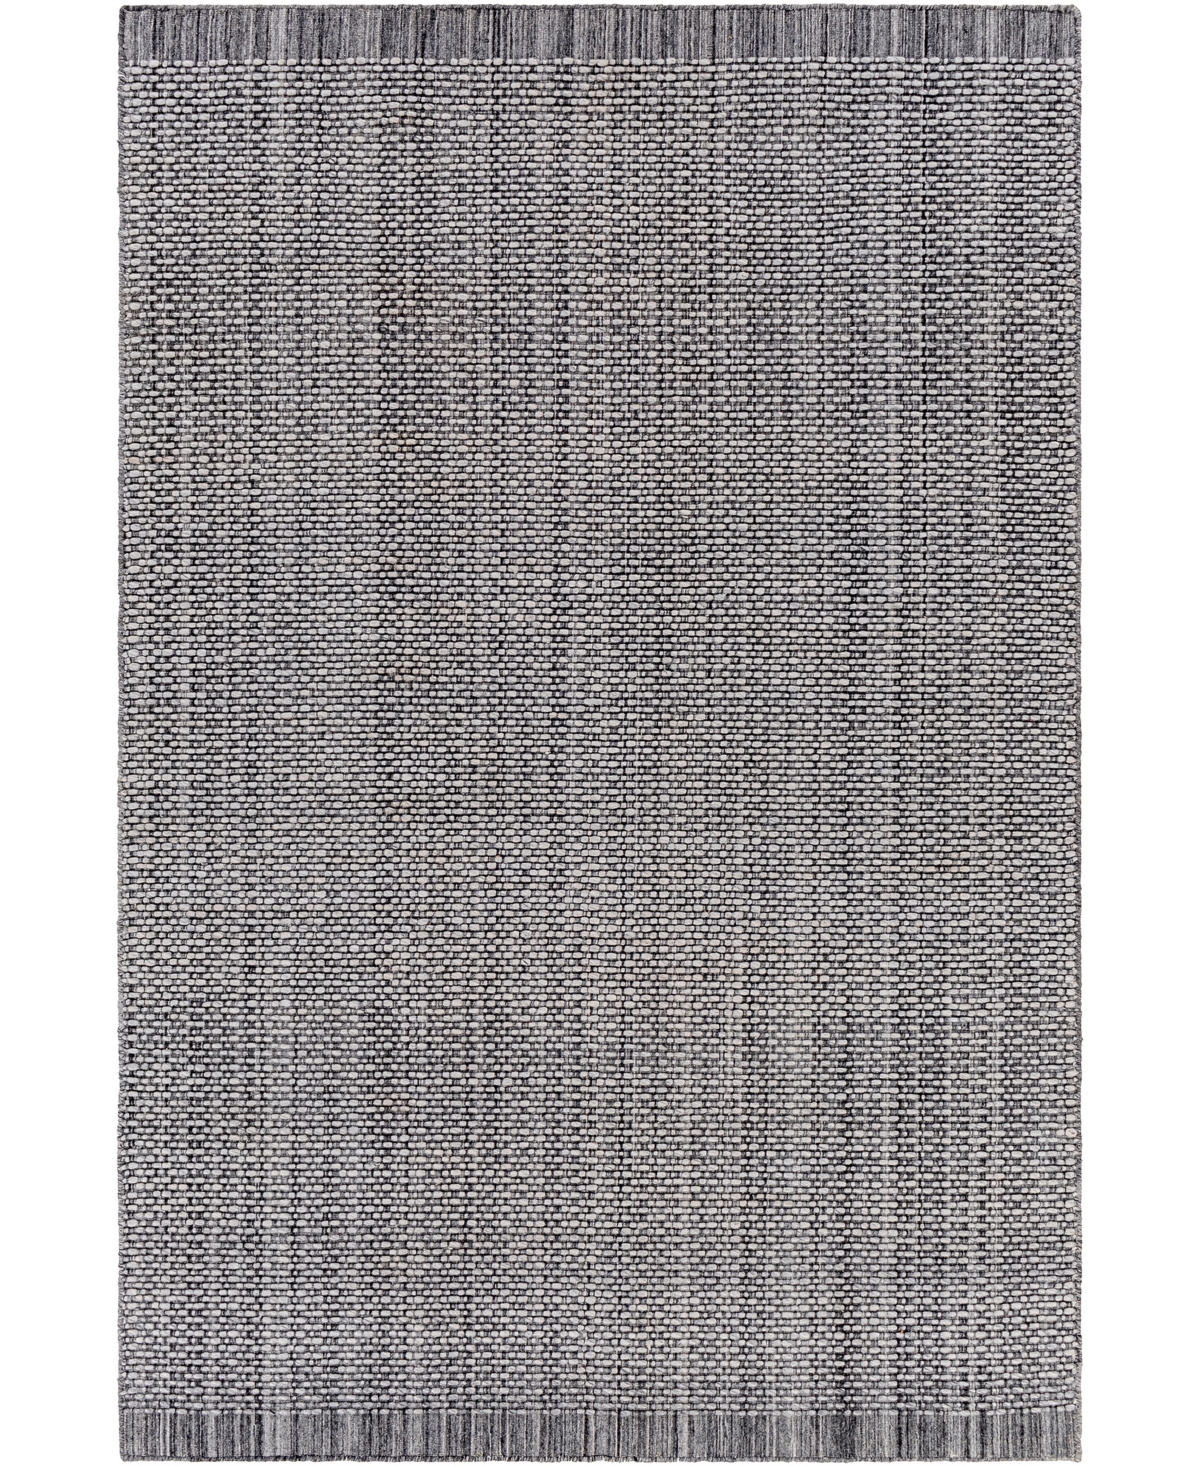 Surya Sycamore Syc-2303 9in x 12' Outdoor Area Rug - Charcoal